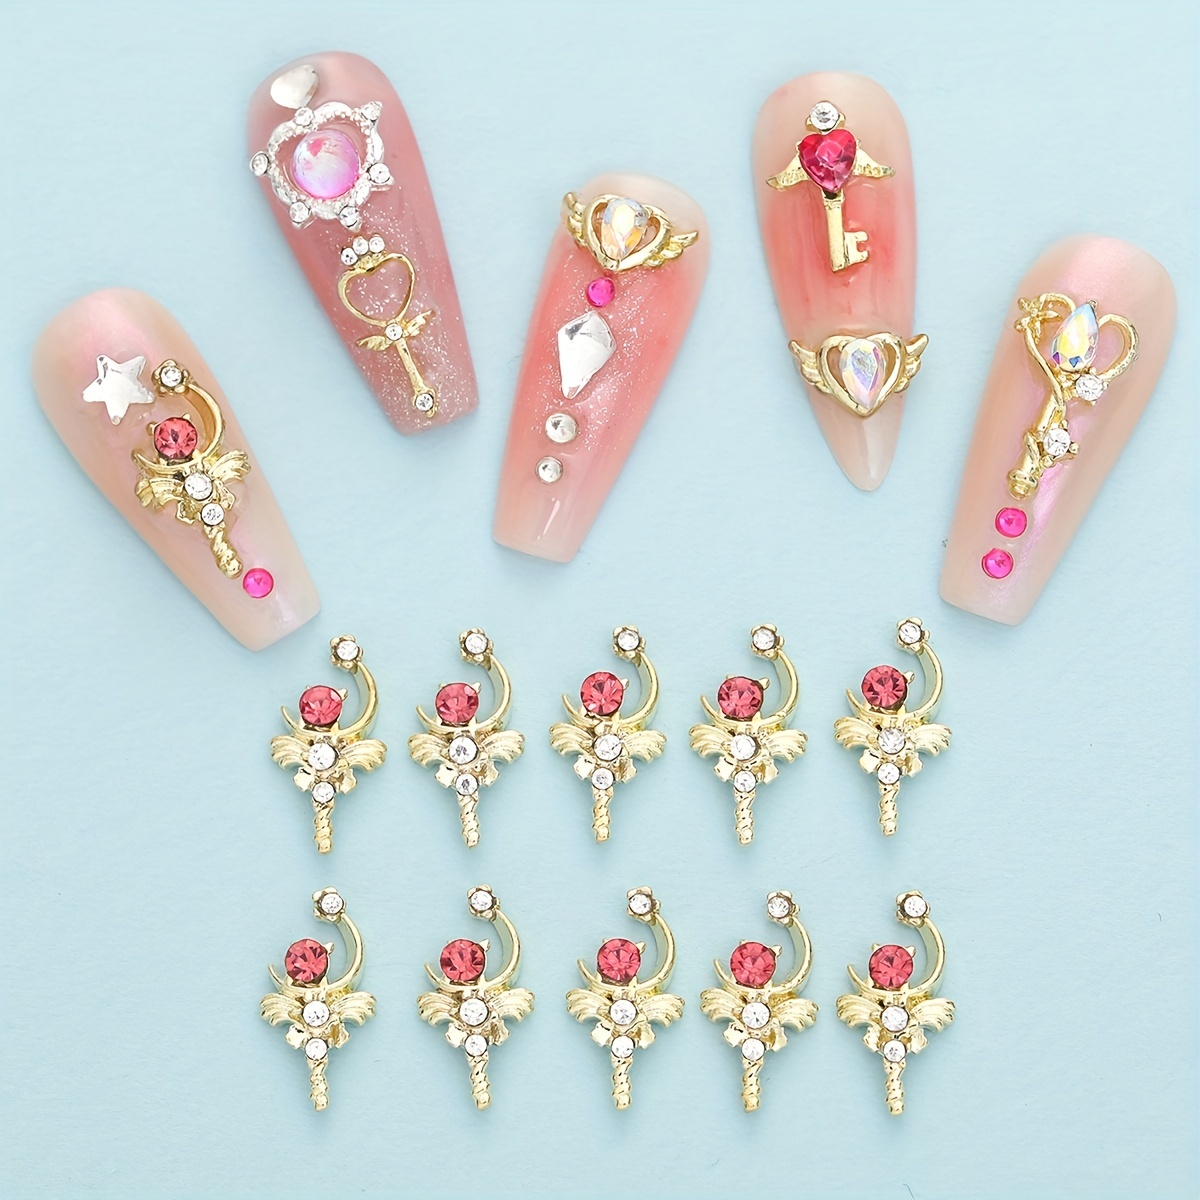 20PCS Kawaii Charms Jewelry Rhinestone Nail Art Charm 3D Mouse Alloy  Rhinestones DIY Manicure Jewelry Crystal Charms for Nails Accessories